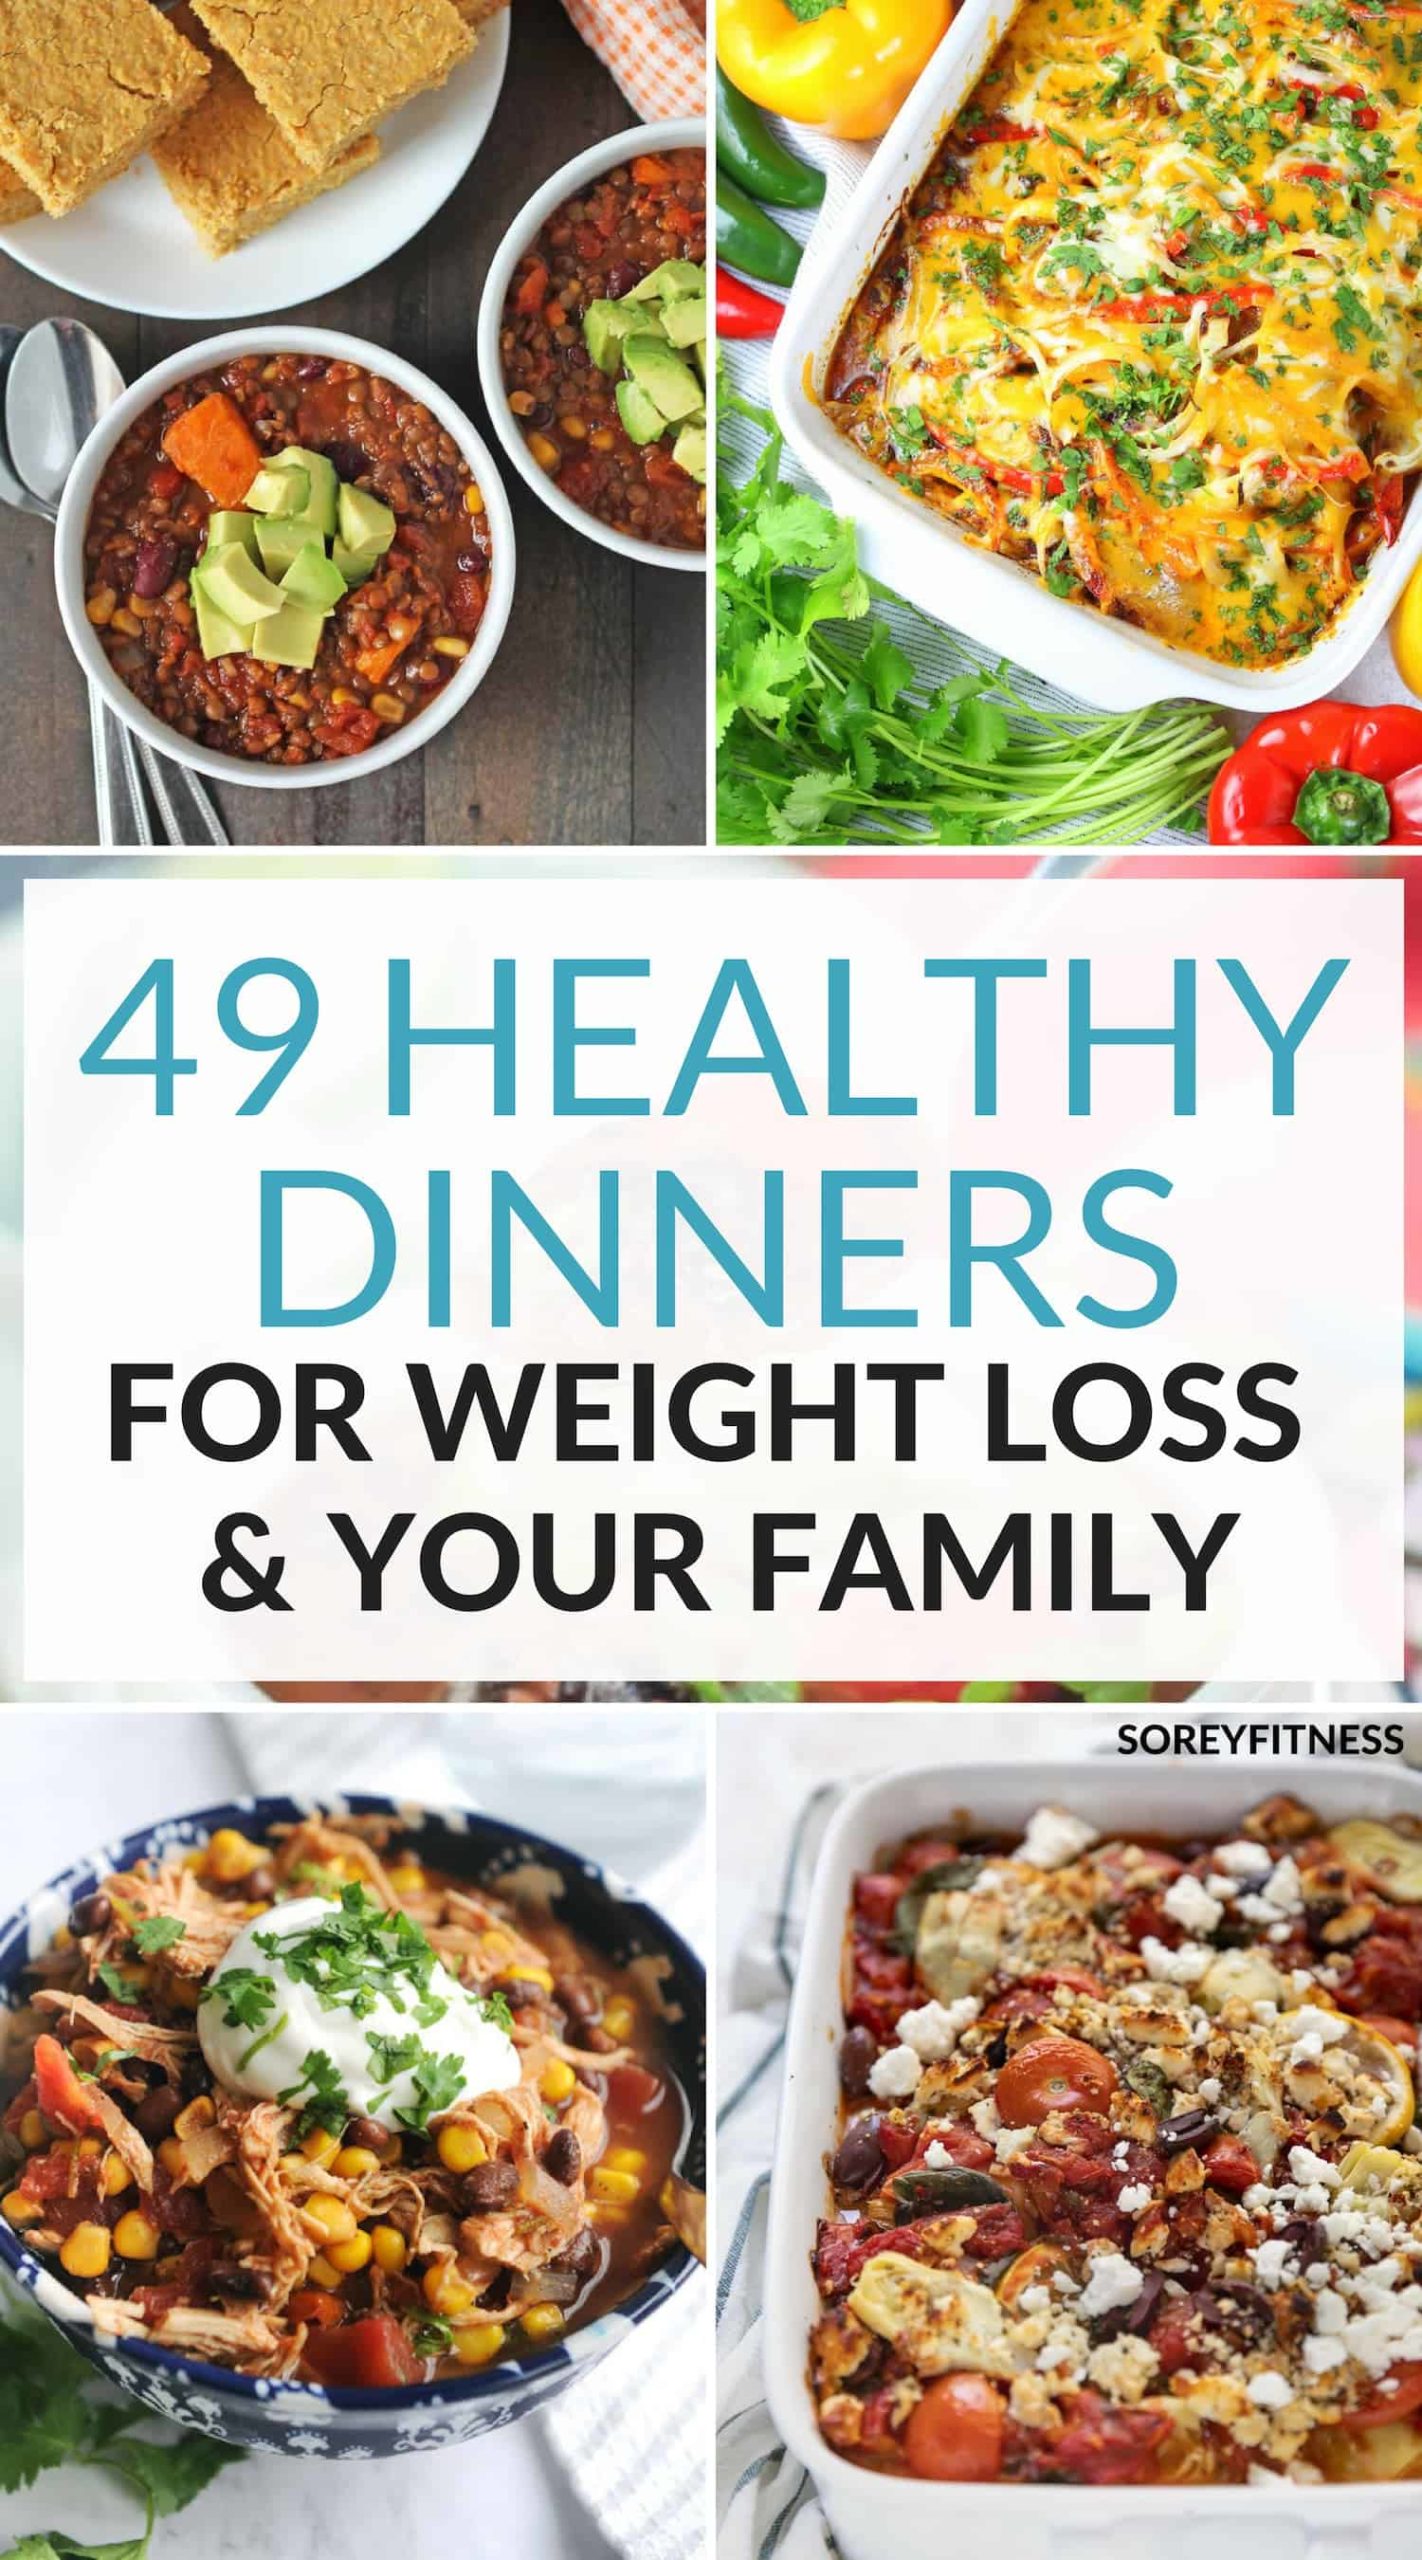 Healthy dinner ideas for weight loss